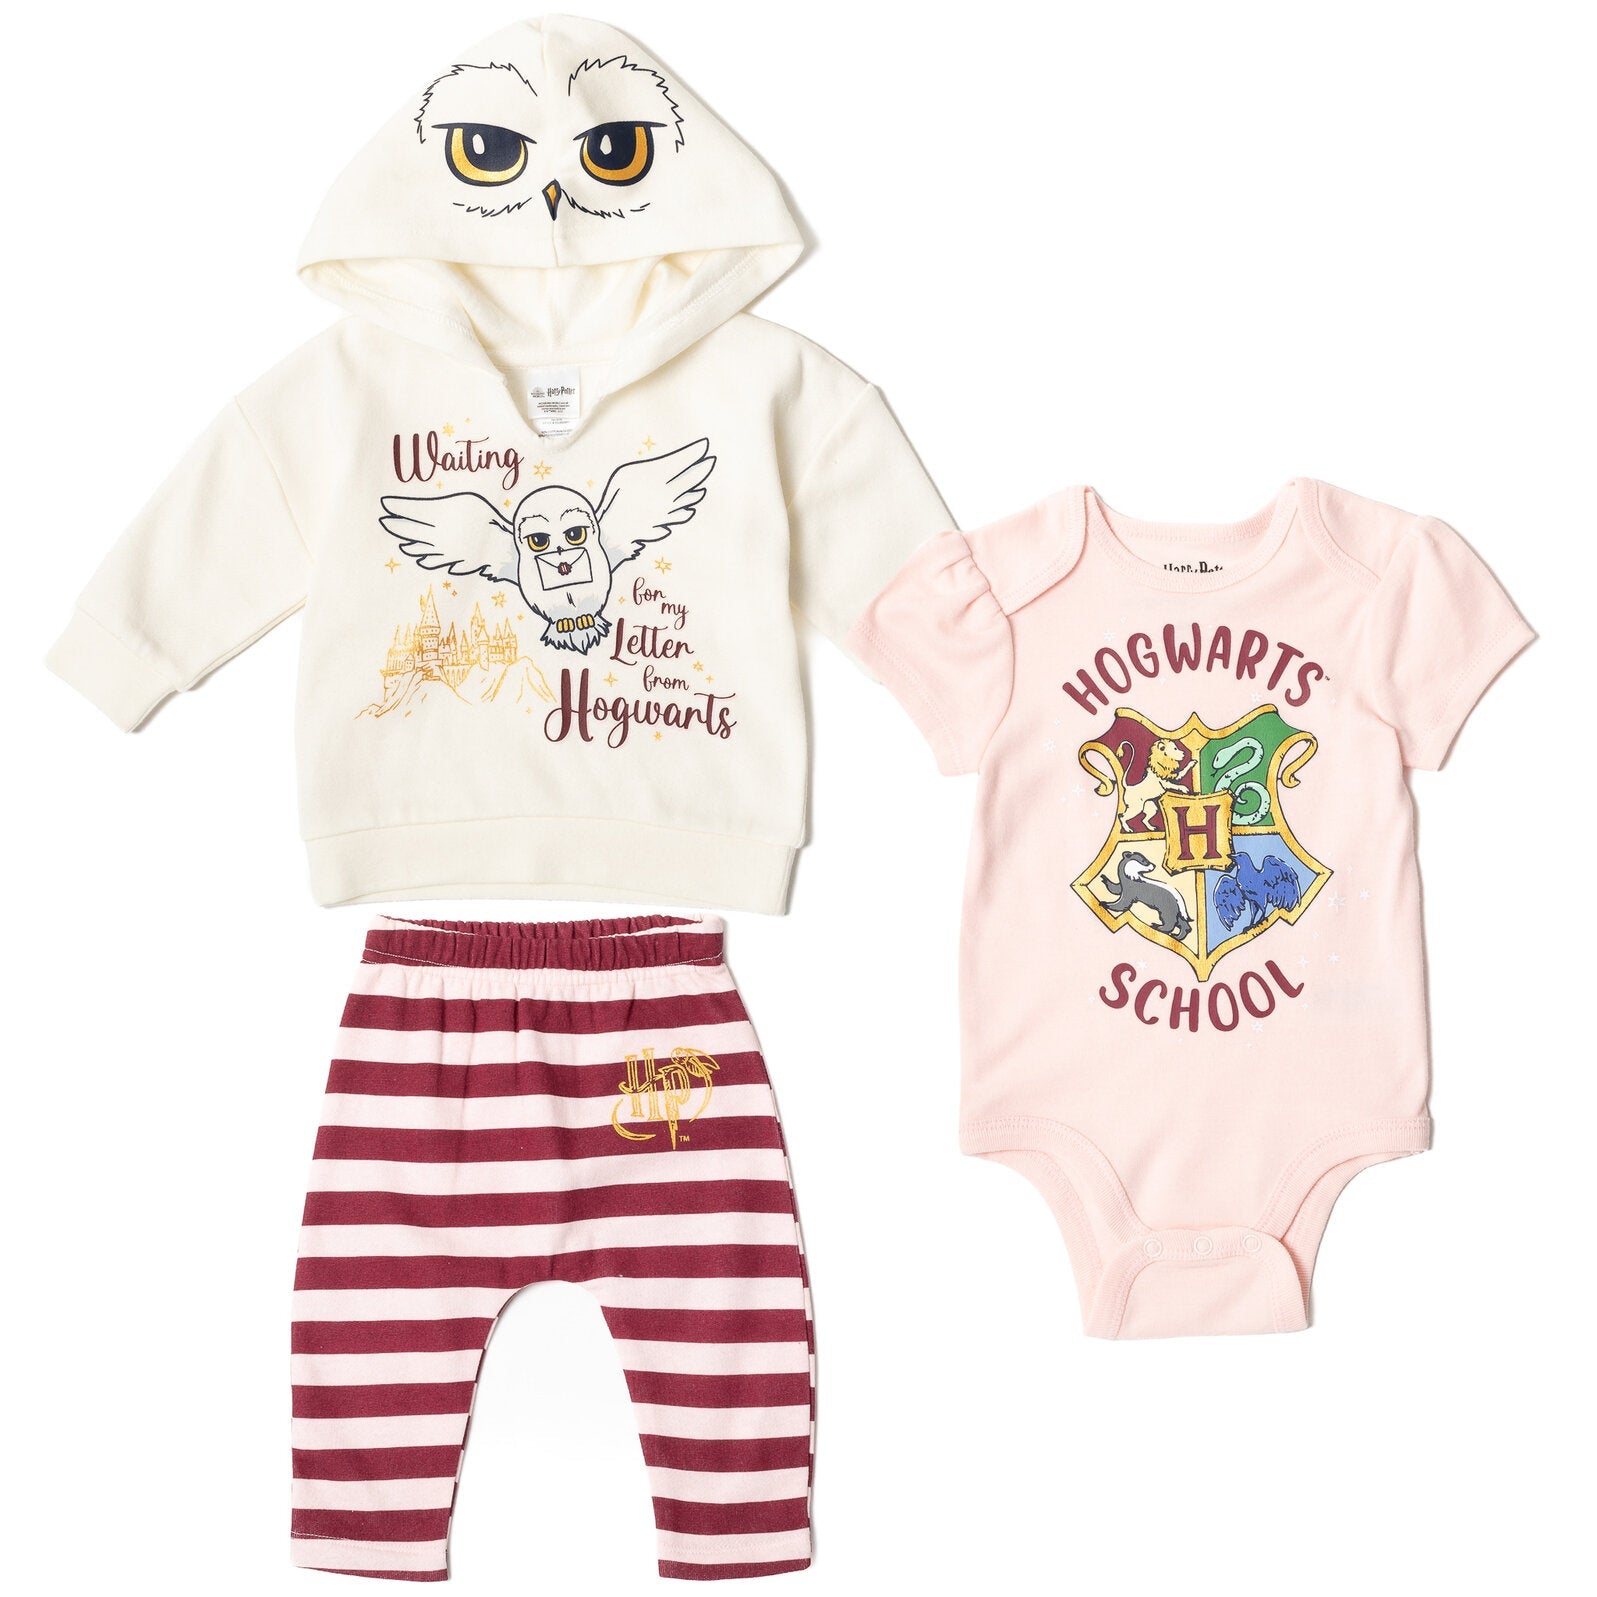 Harry Potter Toddler Boy GRYFFINDOR Sweatshirts and Allover Pants